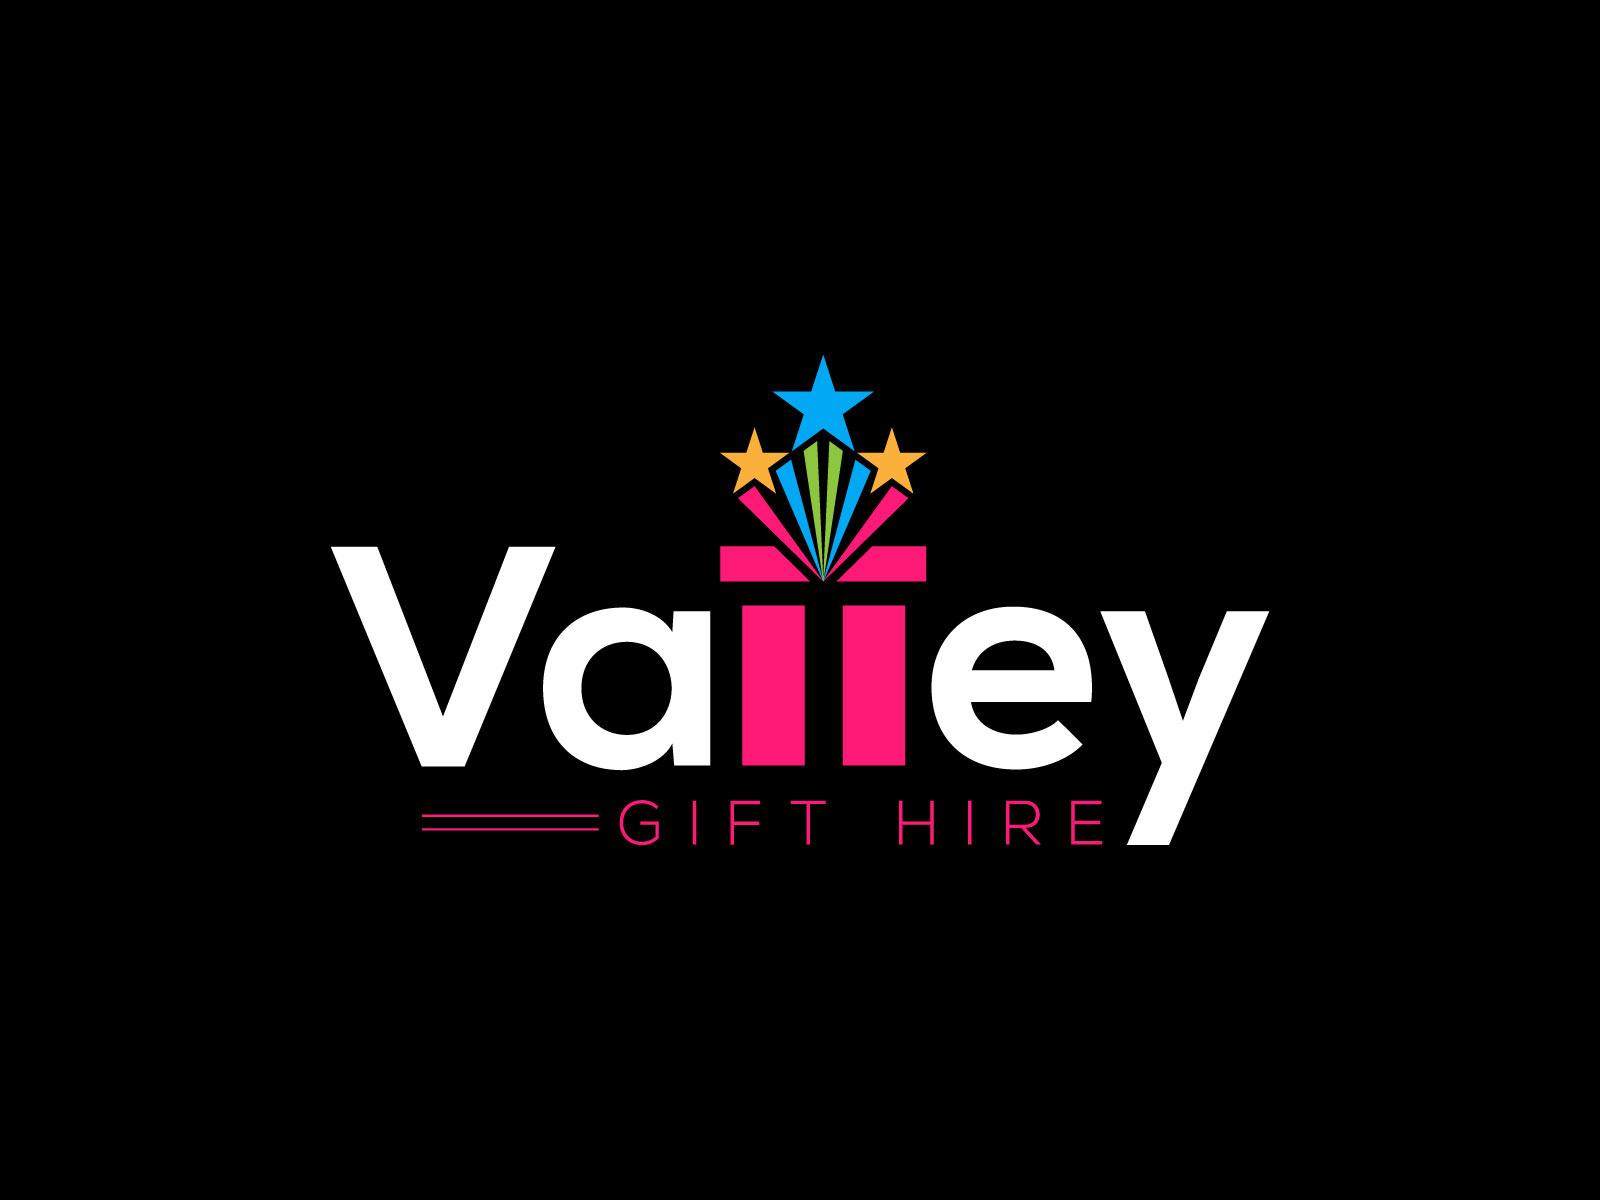 Logo design for Valley Gift Hire by MD Ebrahim Bhuiyan on.